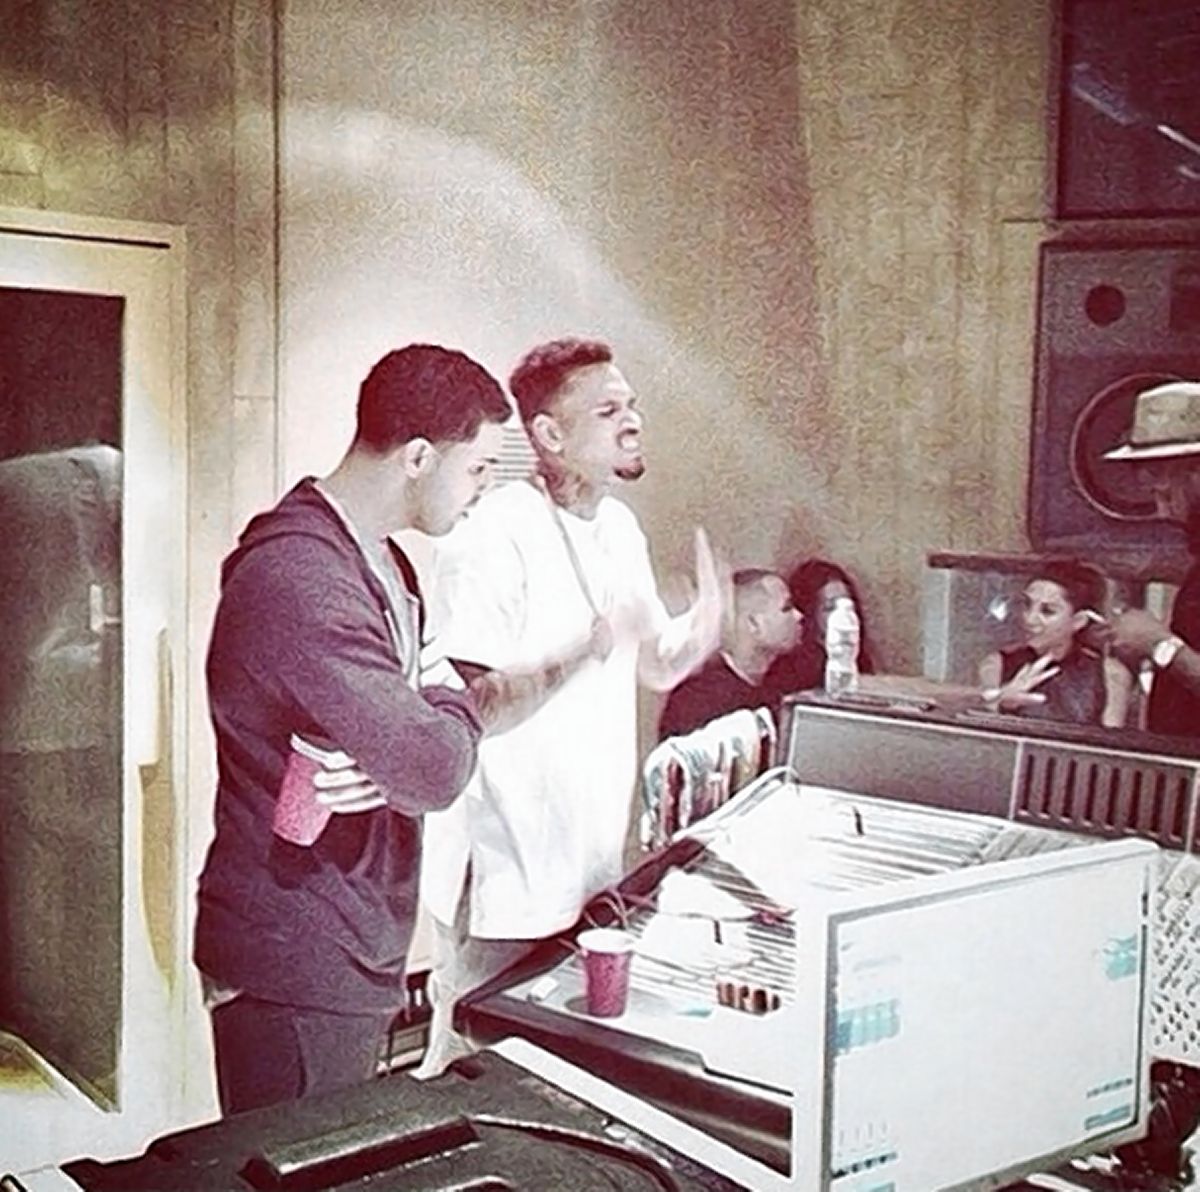 Chris Brown & Drake spotted in the studio together